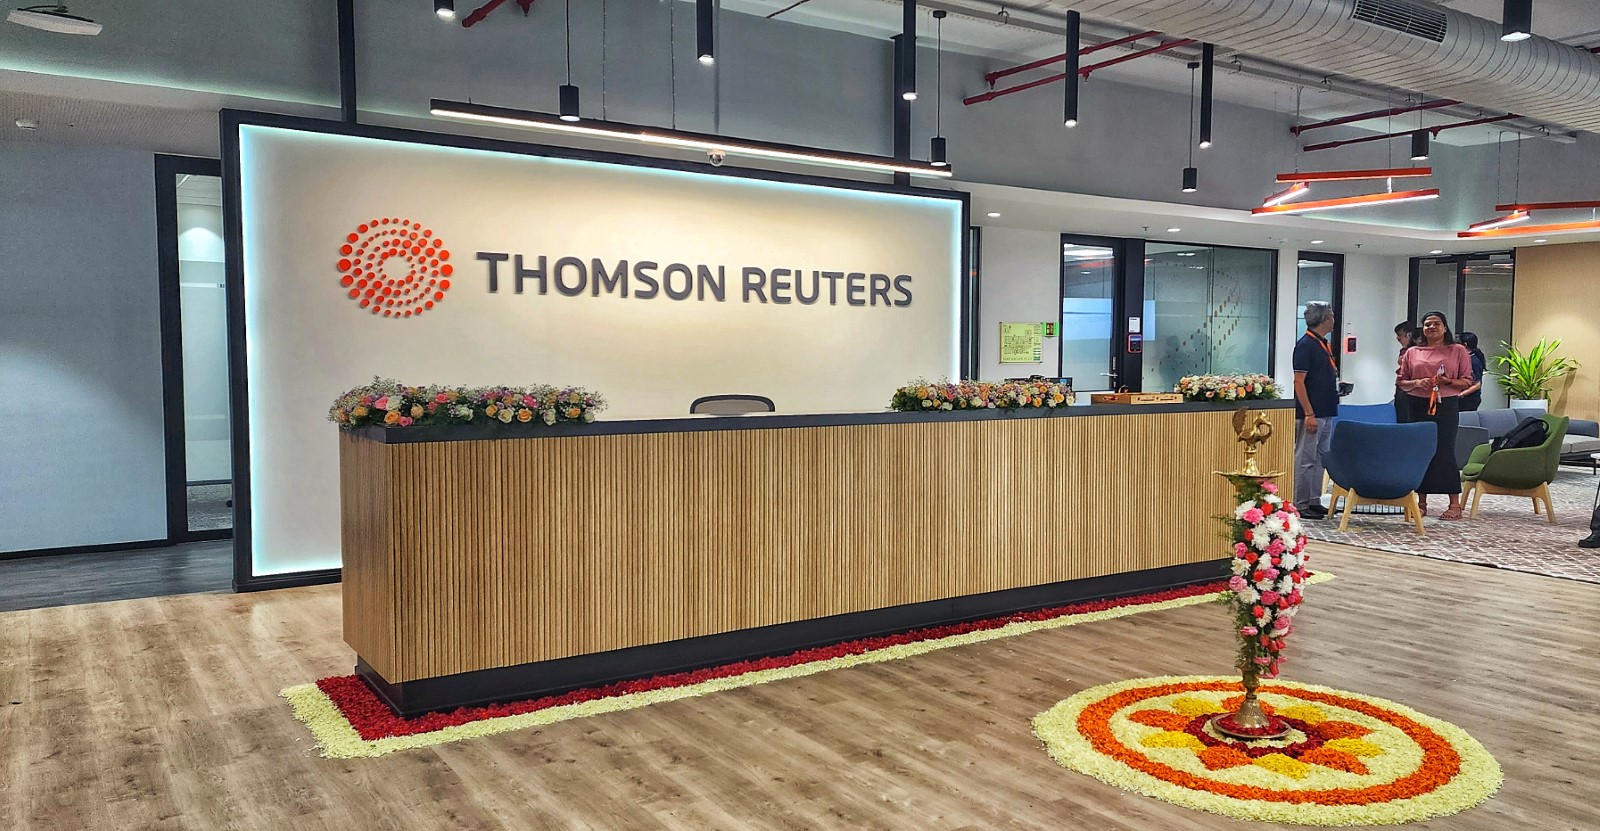 The reception area of Thomson Reuters Bangalore office.